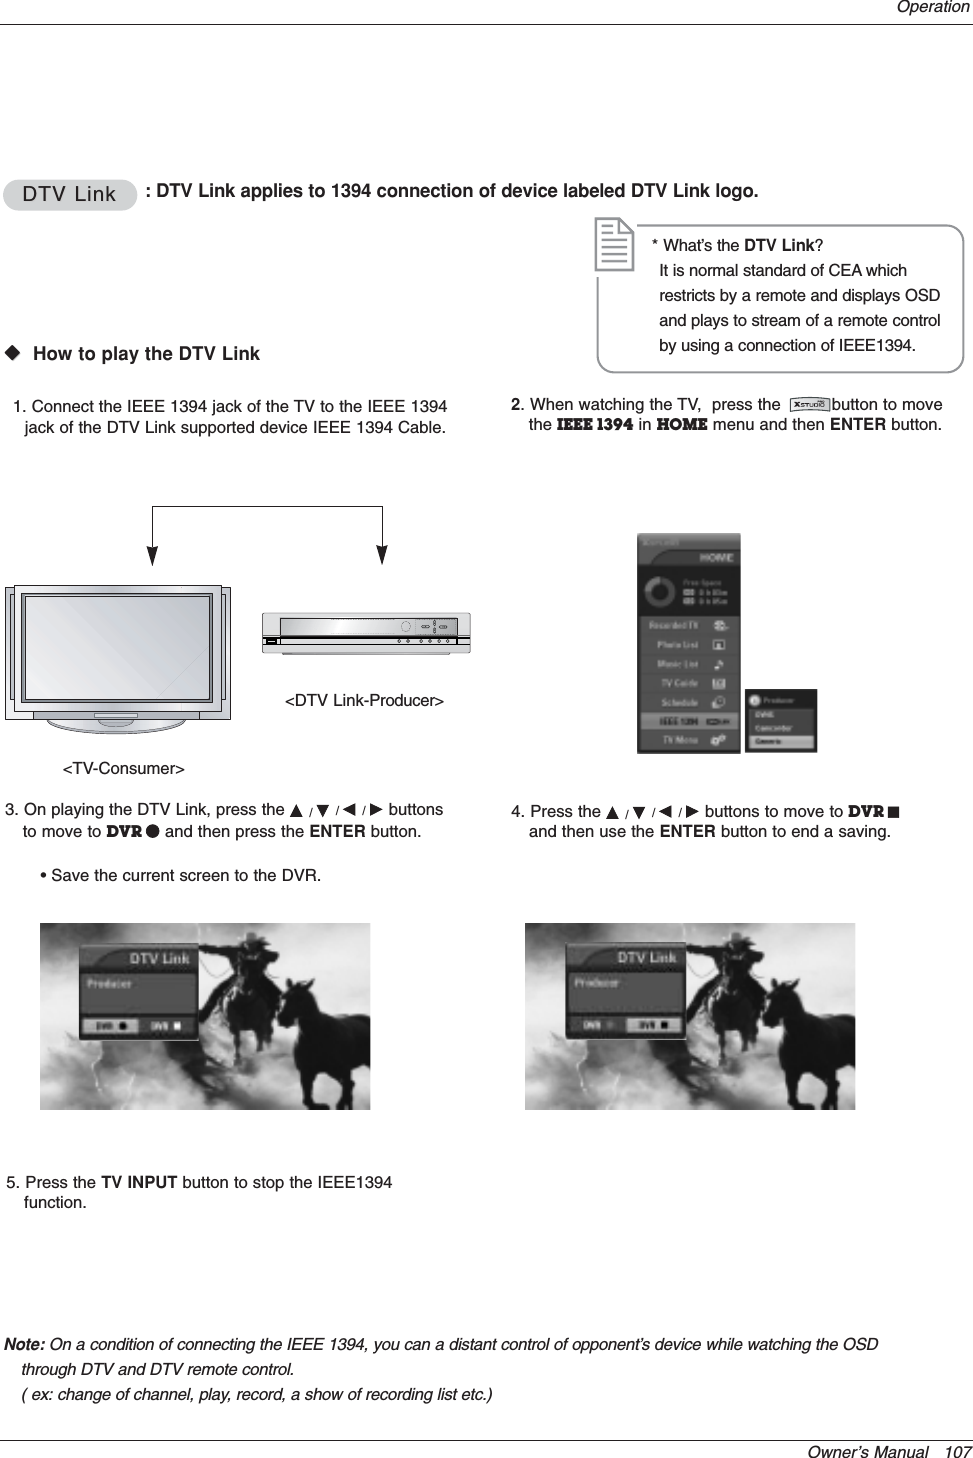 Owner’s Manual   107OperationDTV LinkDTV Link : DTV Link applies to 1394 connection of device labeled DTV Link logo.WWVHow to play the DTV Link&lt;TV-Consumer&gt;&lt;DTV Link-Producer&gt;1. Connect the IEEE 1394 jack of the TV to the IEEE 1394jack of the DTV Link supported device IEEE 1394 Cable.3. On playing the DTV Link, press the D/E/F/Gbuttonsto move to DVR Qand then press the ENTER button.• Save the current screen to the DVR.4. Press the D/E/F/Gbuttons to move to DVR Jand then use the ENTER button to end a saving.* What’s the DTV Link?It is normal standard of CEA whichrestricts by a remote and displays OSDand plays to stream of a remote controlby using a connection of IEEE1394.Note: On a condition of connecting the IEEE 1394, you can a distant control of opponent’s device while watching the OSDthrough DTV and DTV remote control.( ex: change of channel, play, record, a show of recording list etc.)2. When watching the TV,  press the          button to movethe IEEE 1394 in HOME menu and then ENTER button.5. Press the TV INPUT button to stop the IEEE1394function.